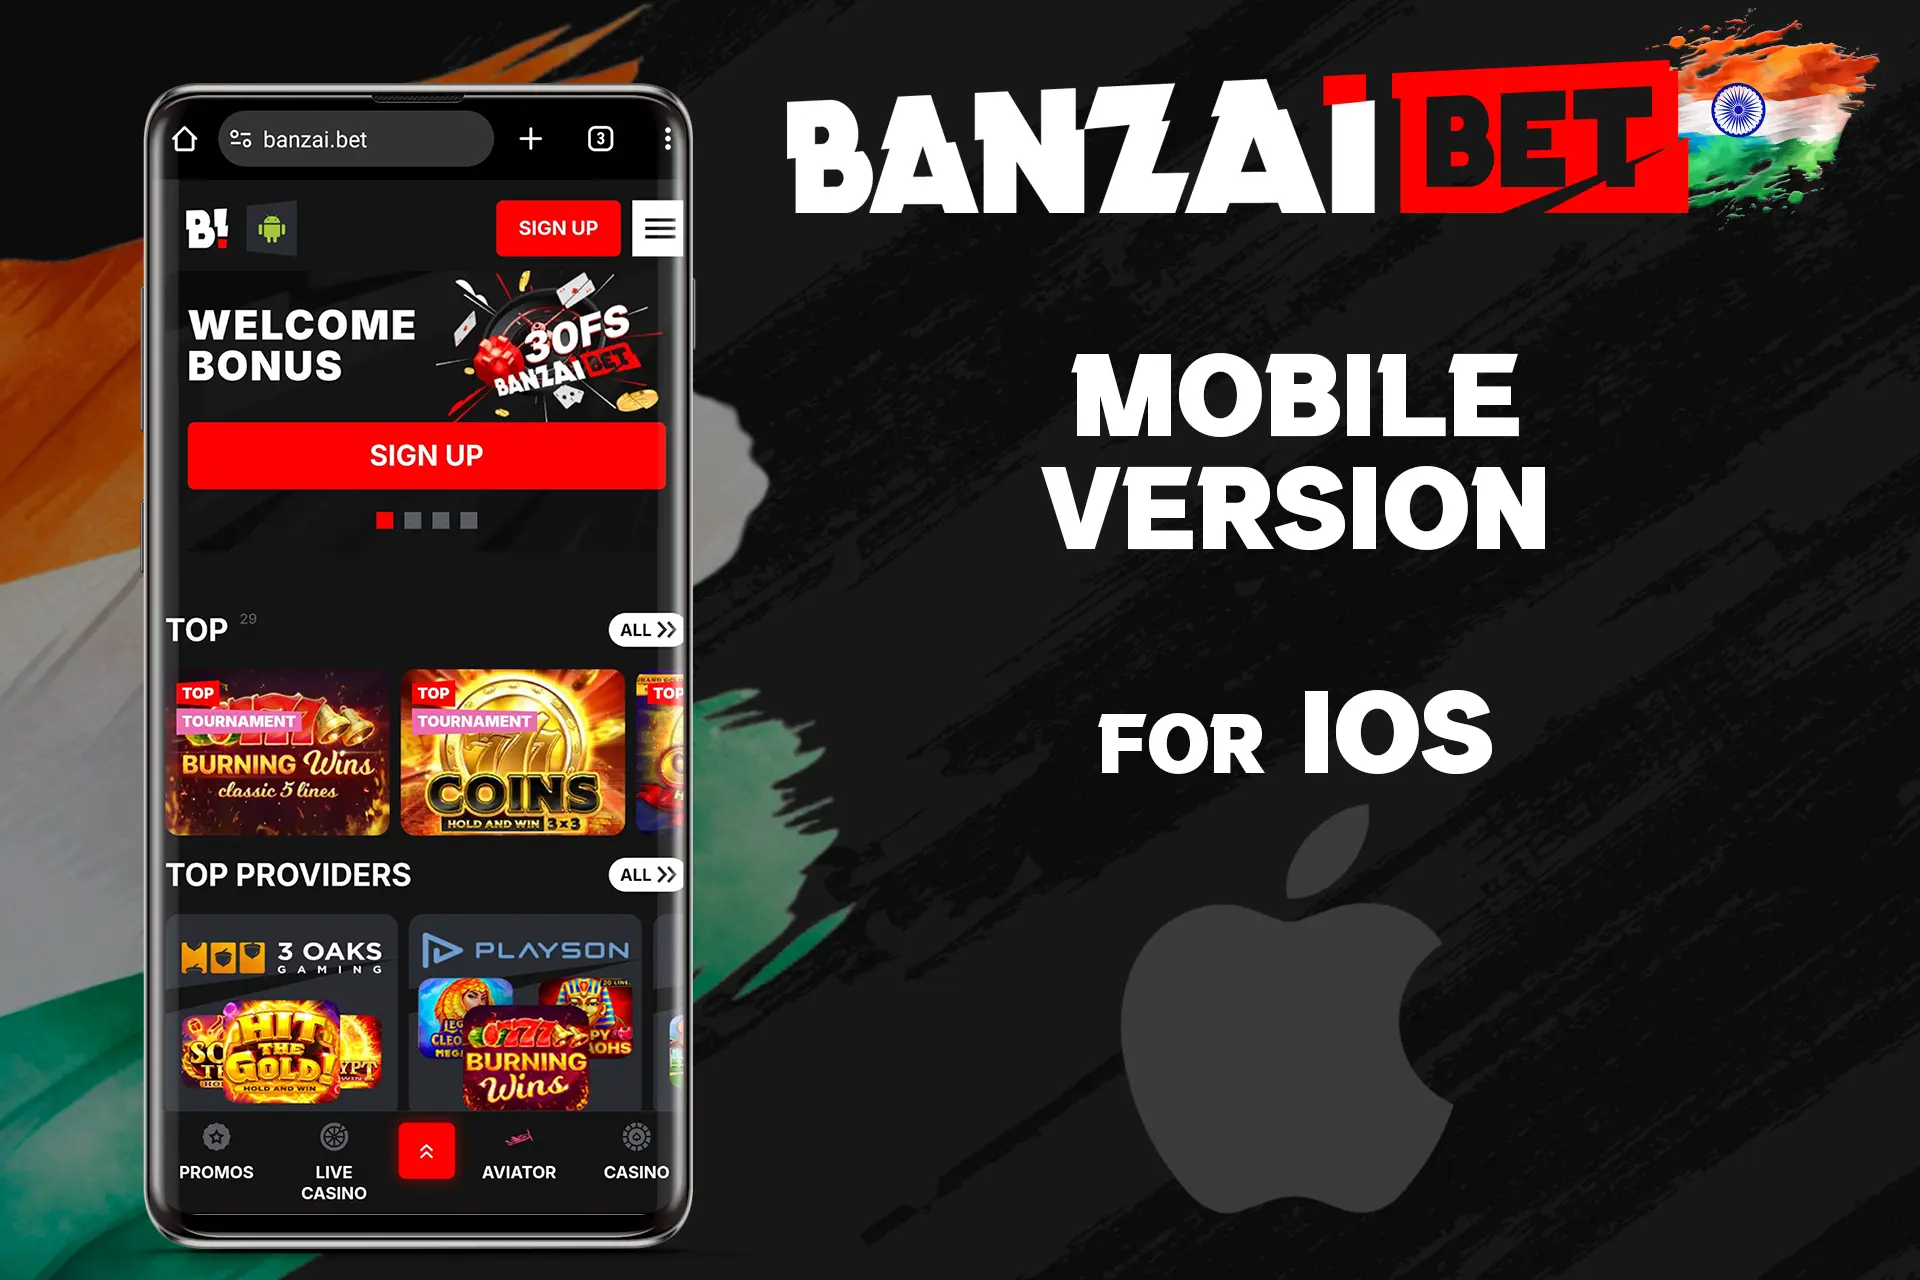 Use the mobile version of the Banzaibet website for iOS